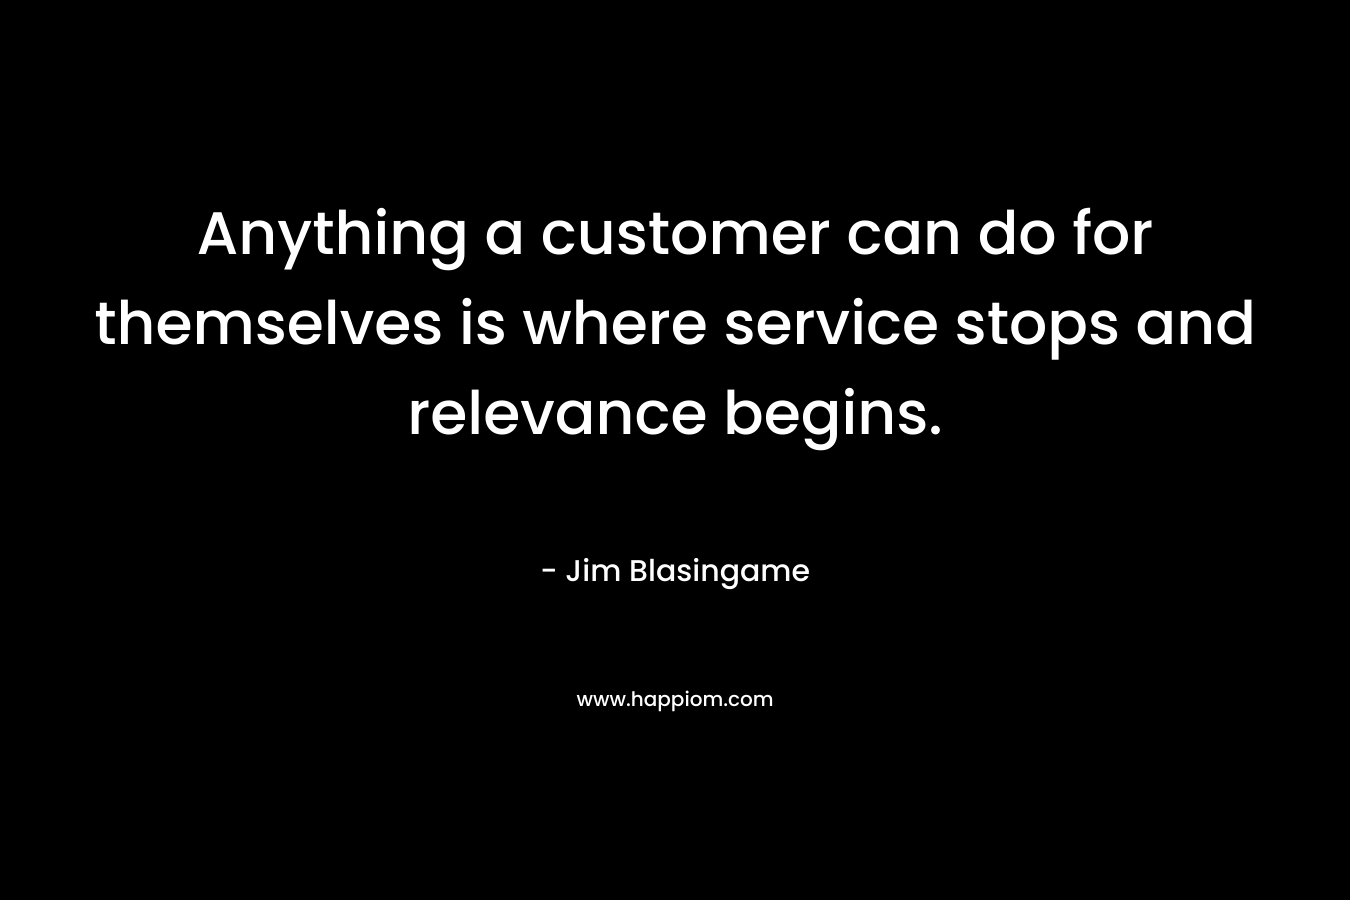 Anything a customer can do for themselves is where service stops and relevance begins.